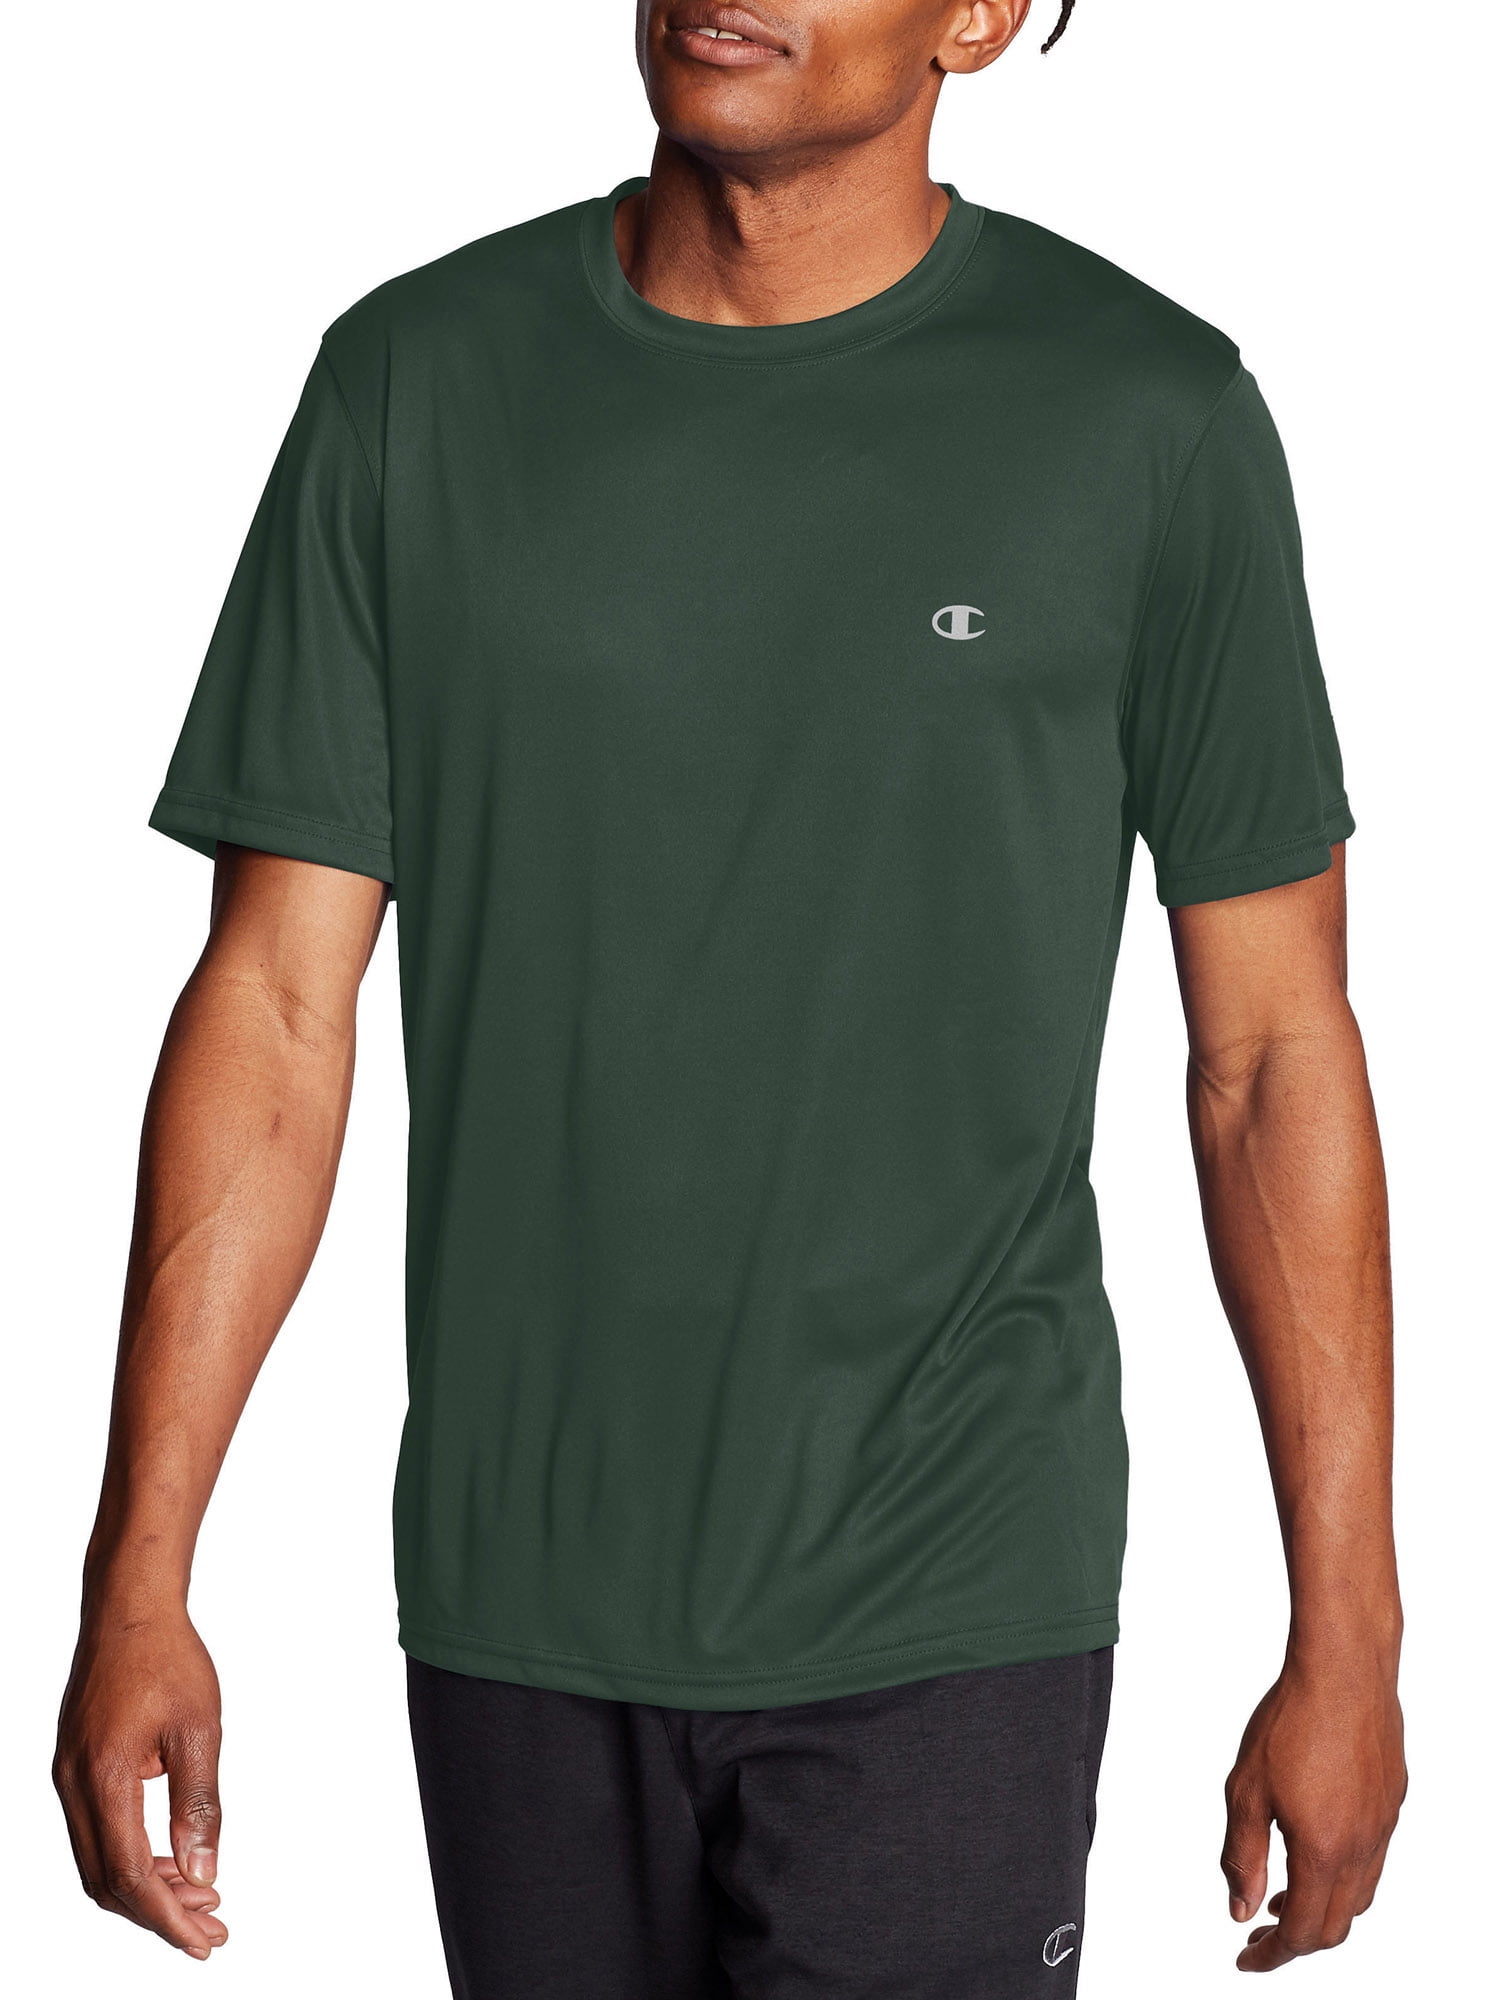 Champion Men's Double Dry Performance T-Shirt, up to Size 2XL 